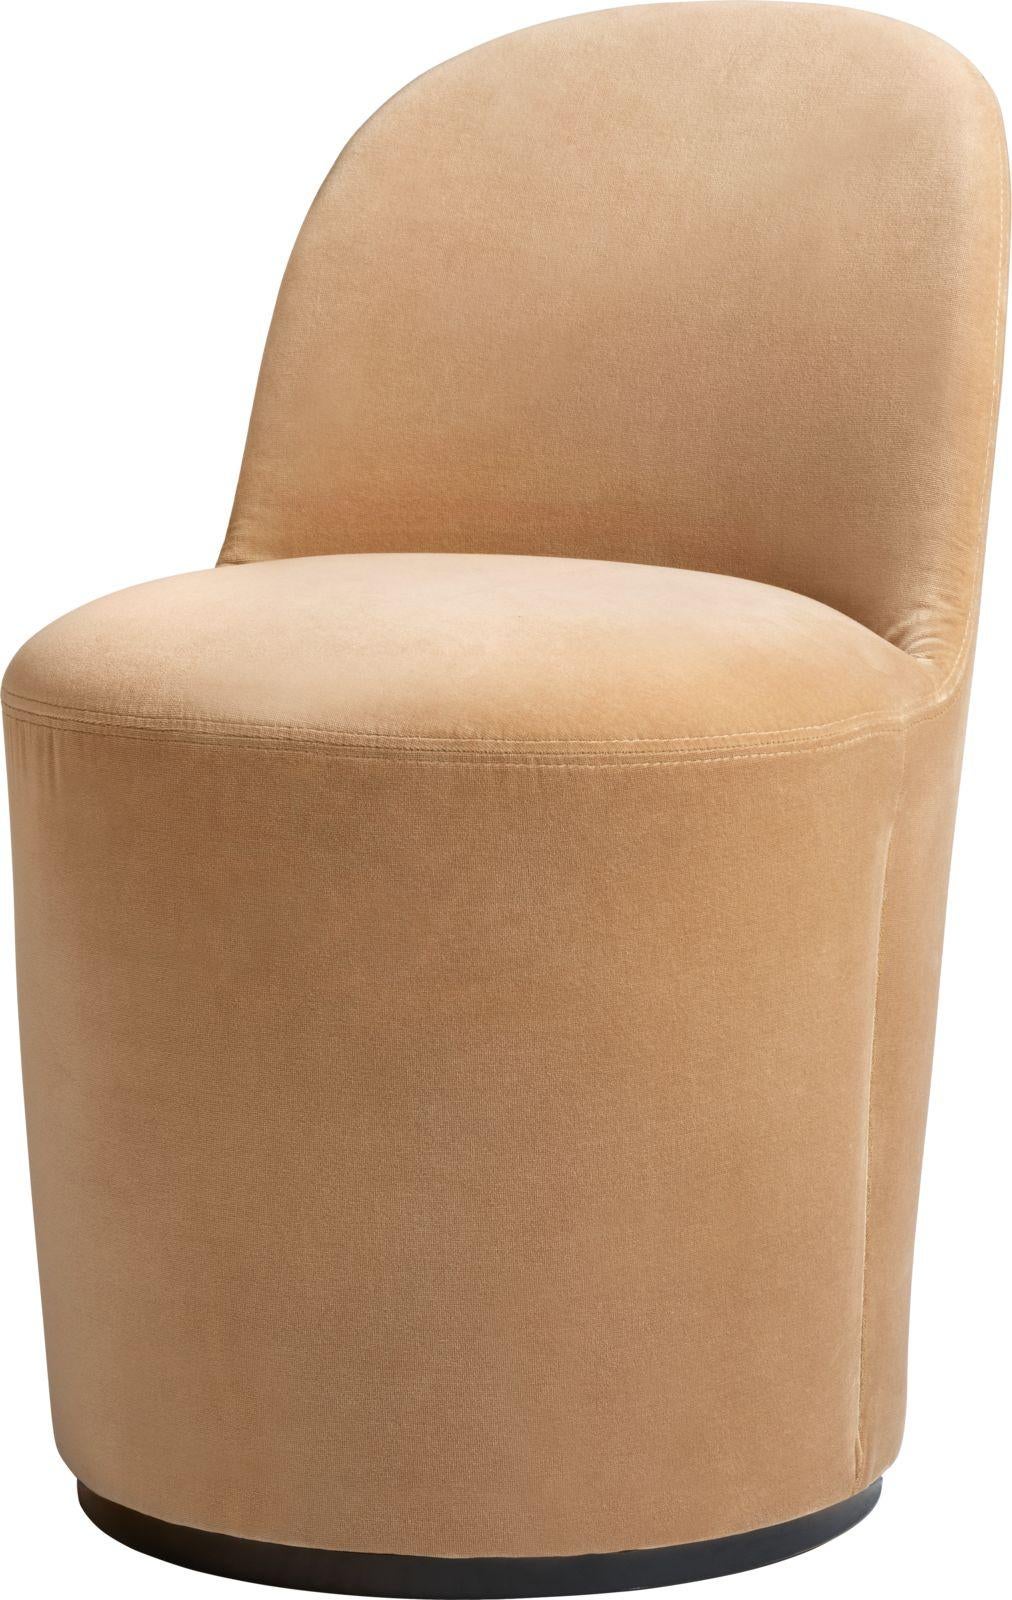 Modern Tail High Back Chauffeuse Style Upholstered Dining Chair